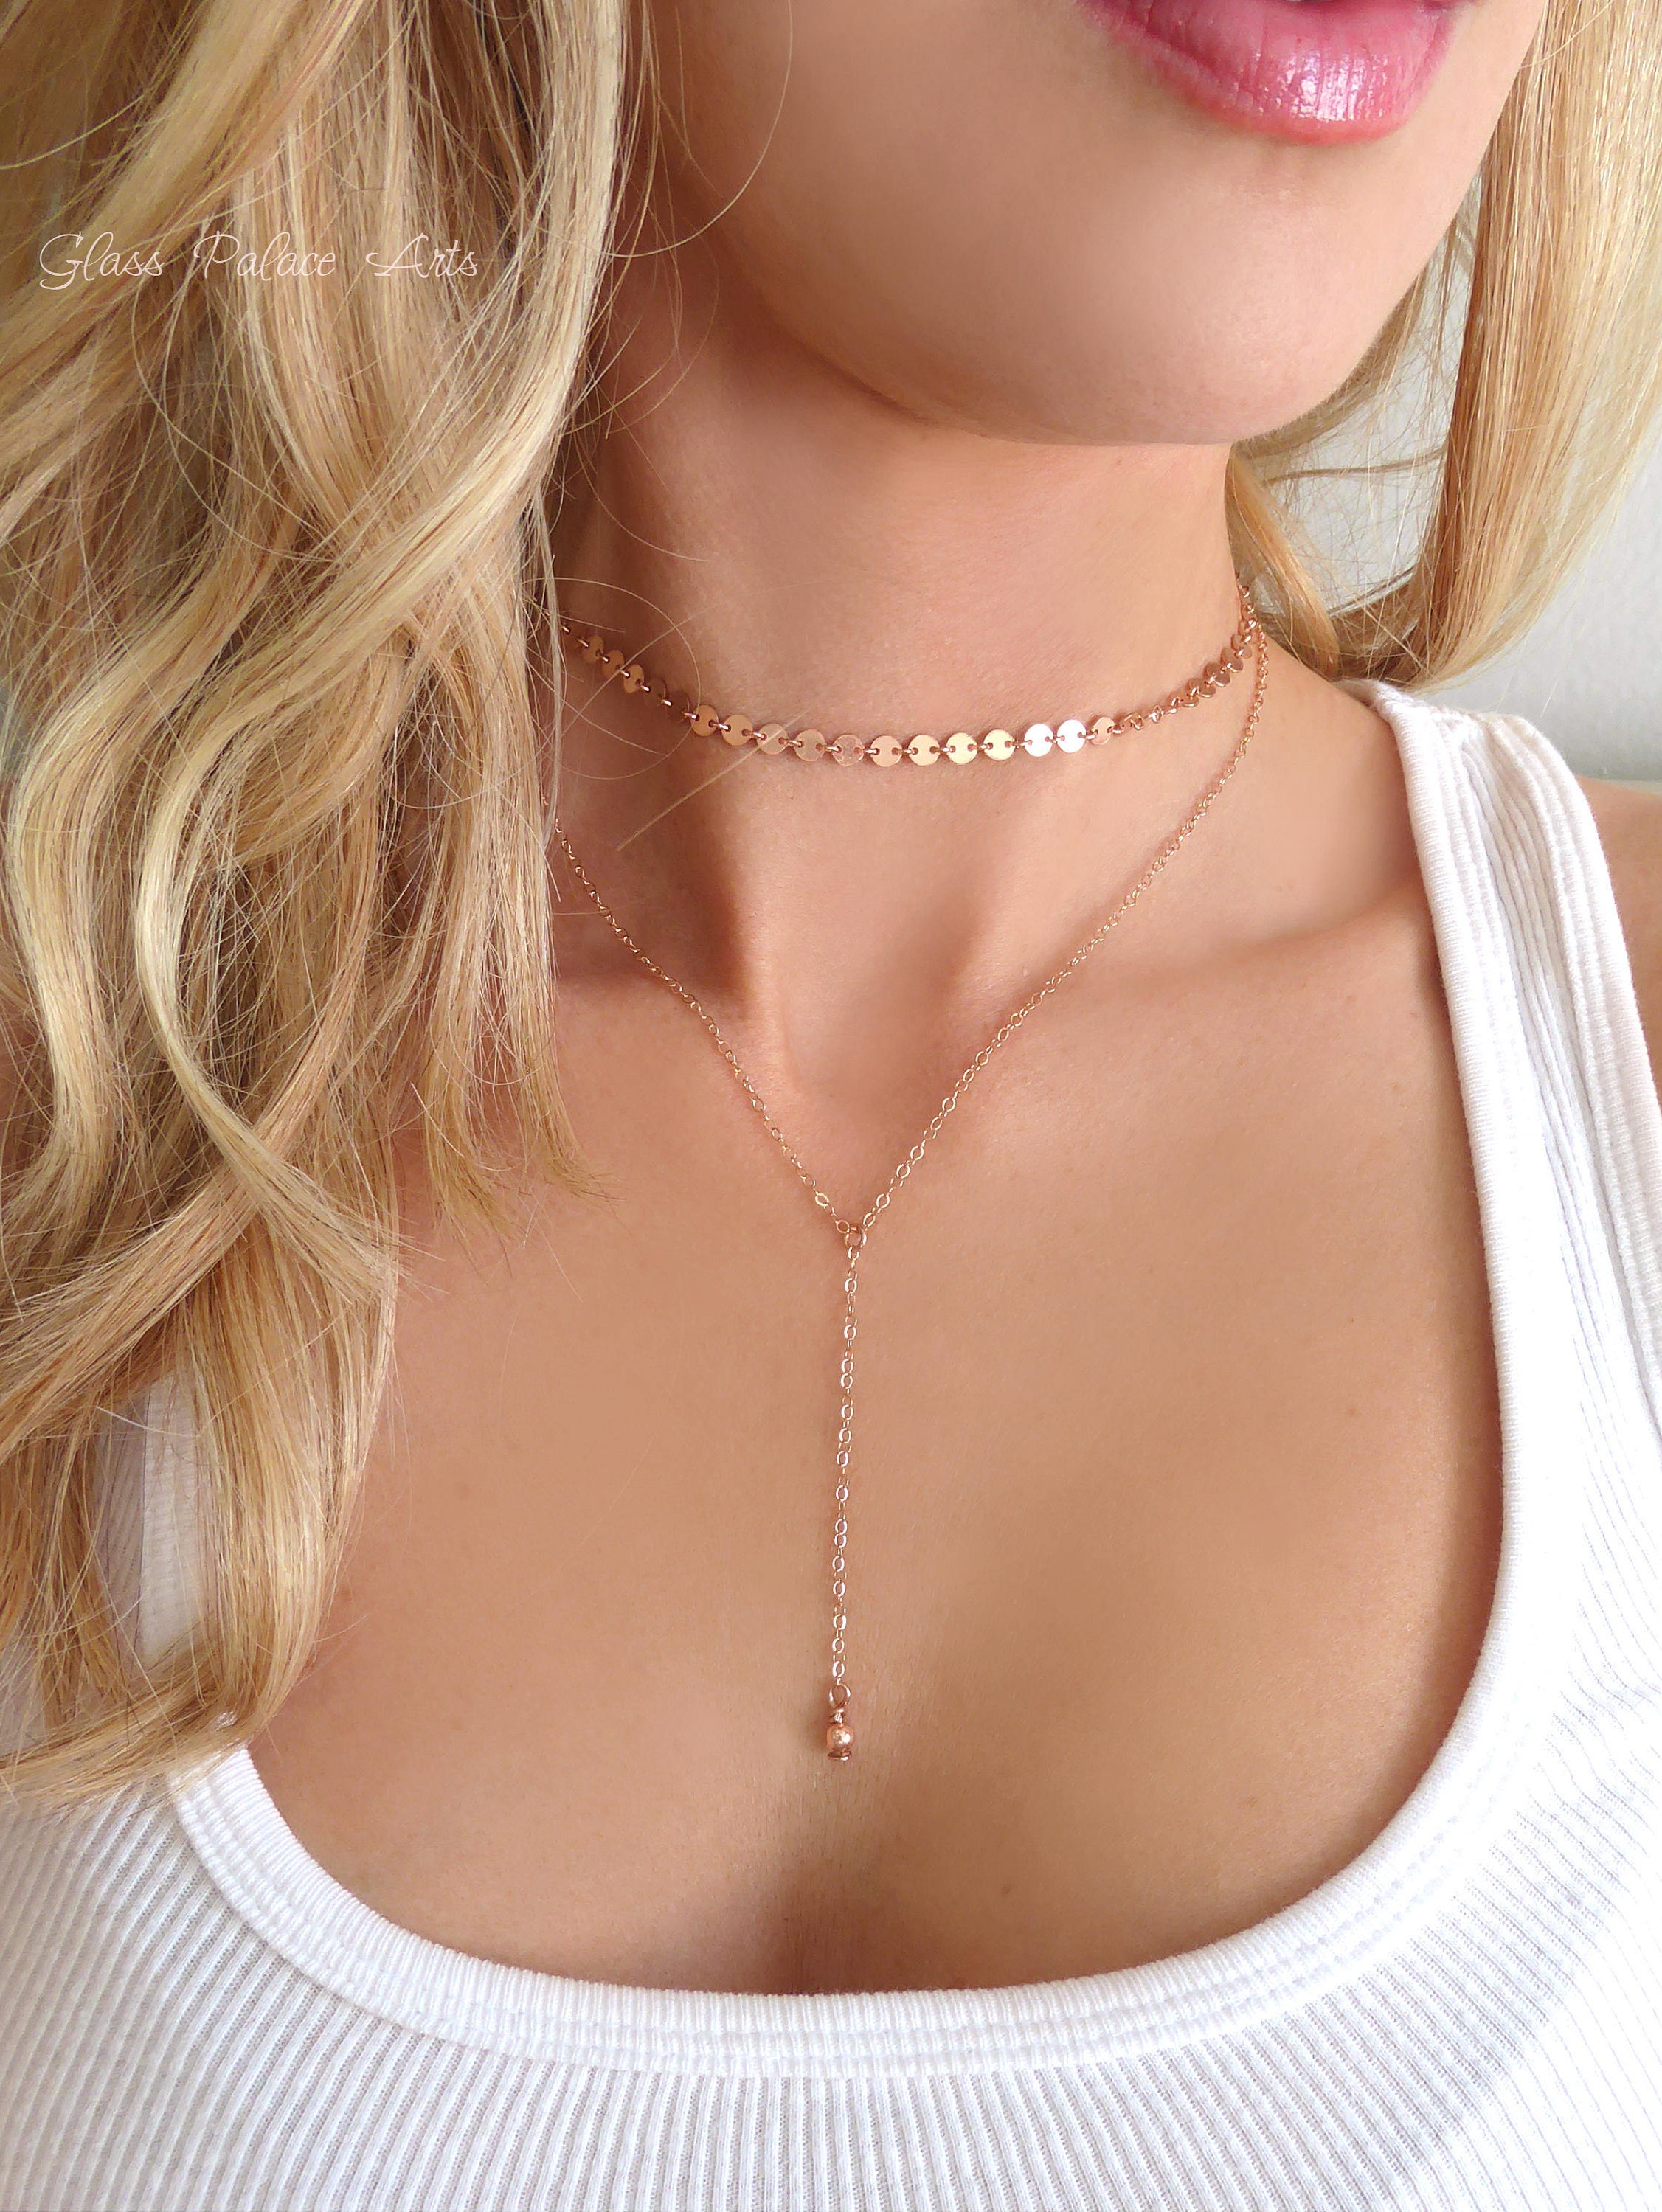 Rose Gold Choker Necklace, Rose Gold Lariat Y Necklace, Delicate Dainty Double Chain Choker Set, Gift for Girlfriend, Gift for Her, Silver